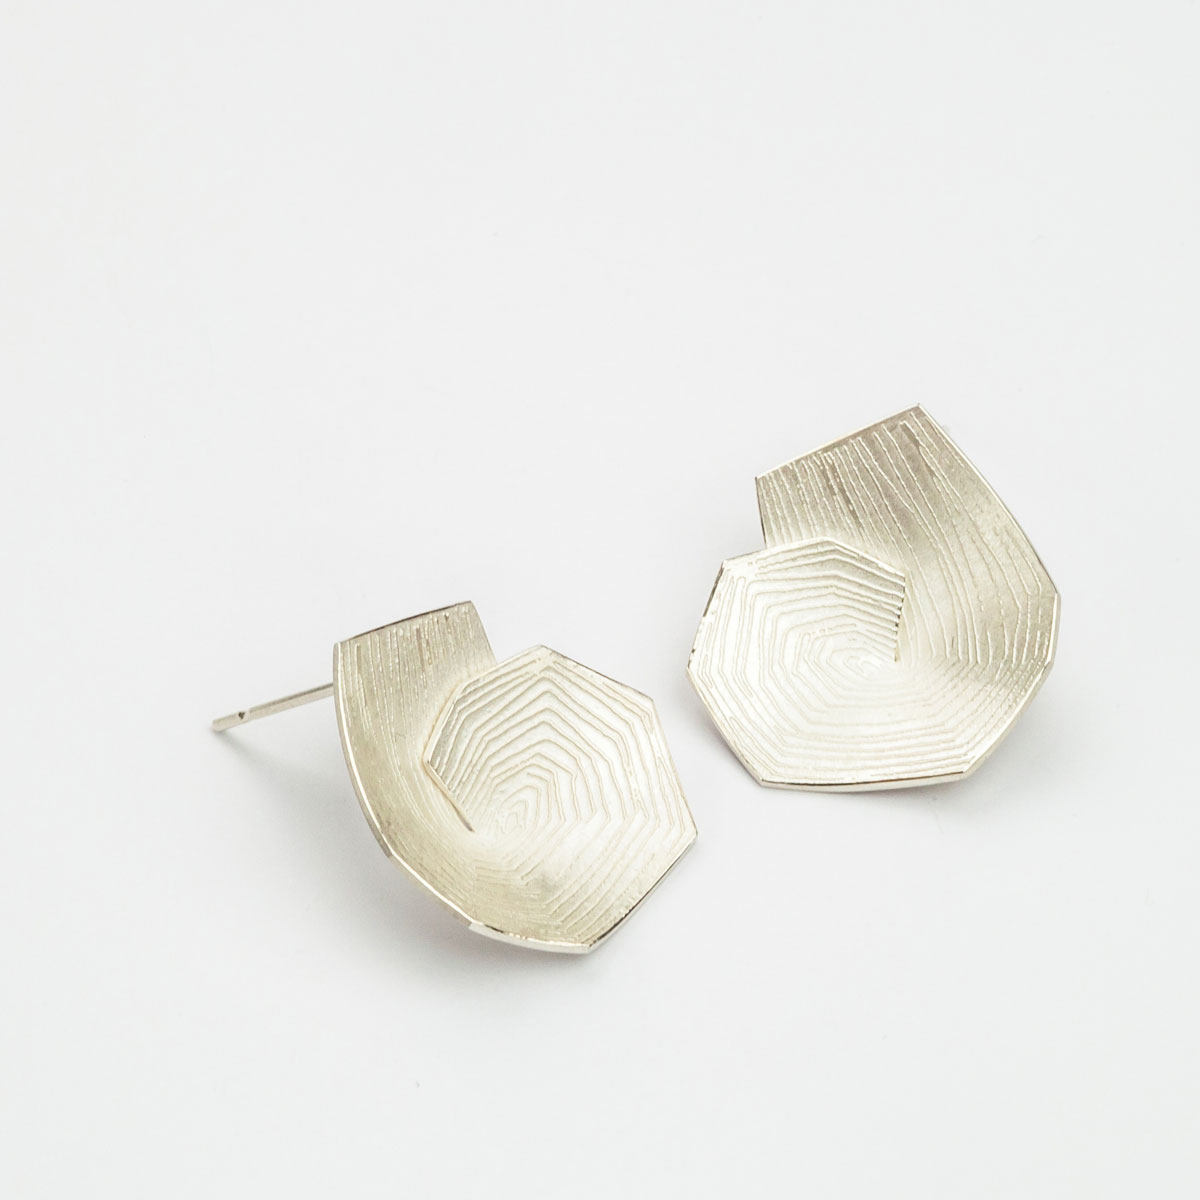 ‘Lines in Motion’ Spiral Silver Earrings